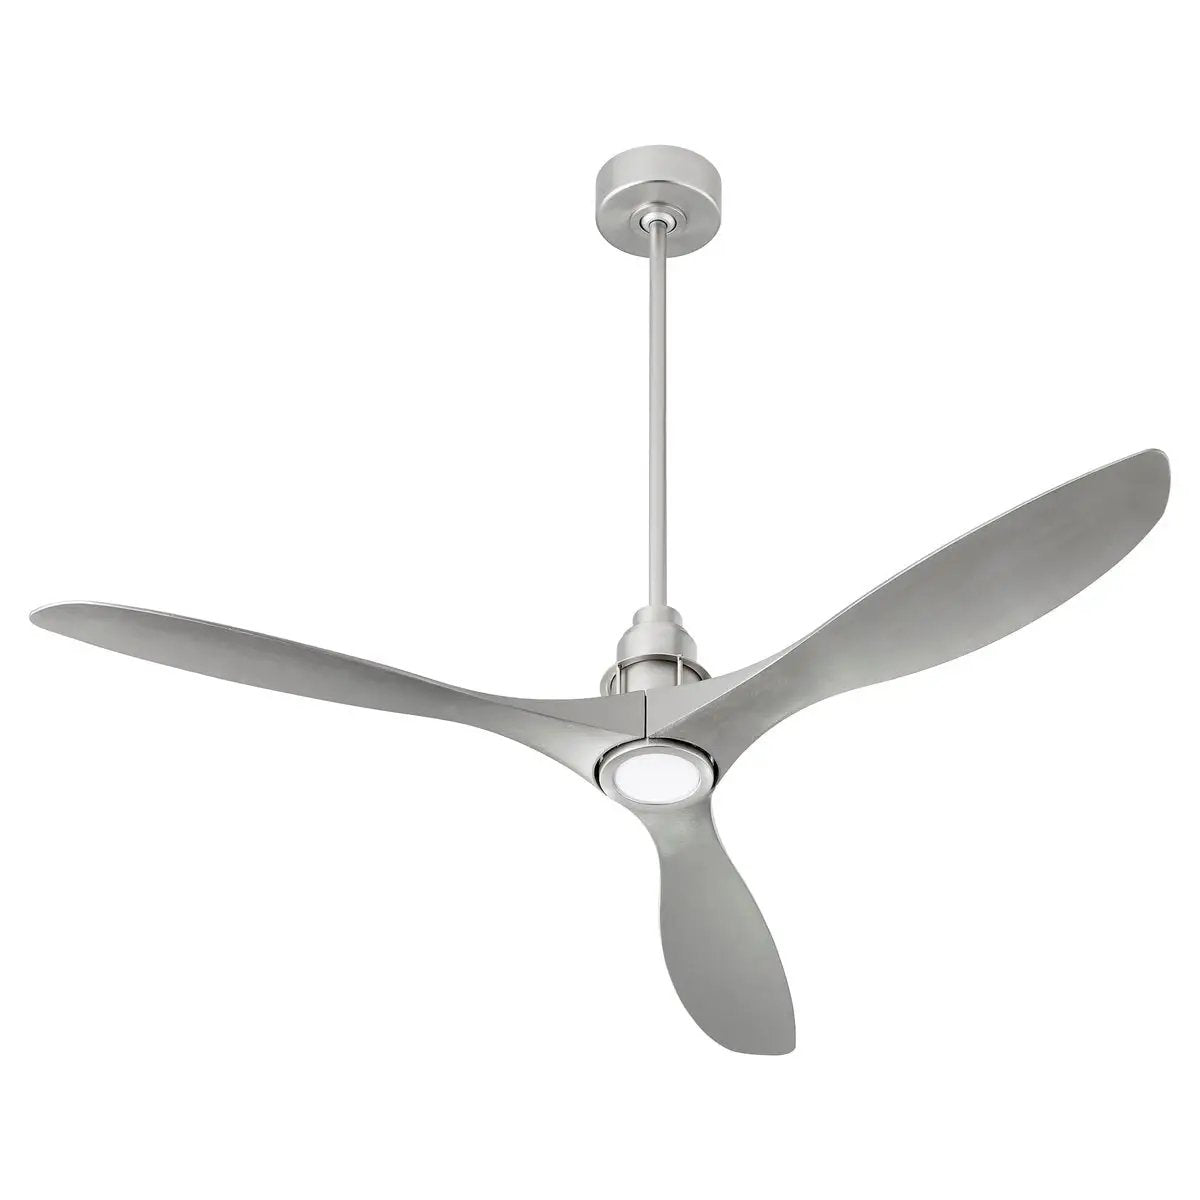 A sleek, modern ceiling fan with a light, featuring a chrome stained housing and three monochromatic blades for powerful air circulation.